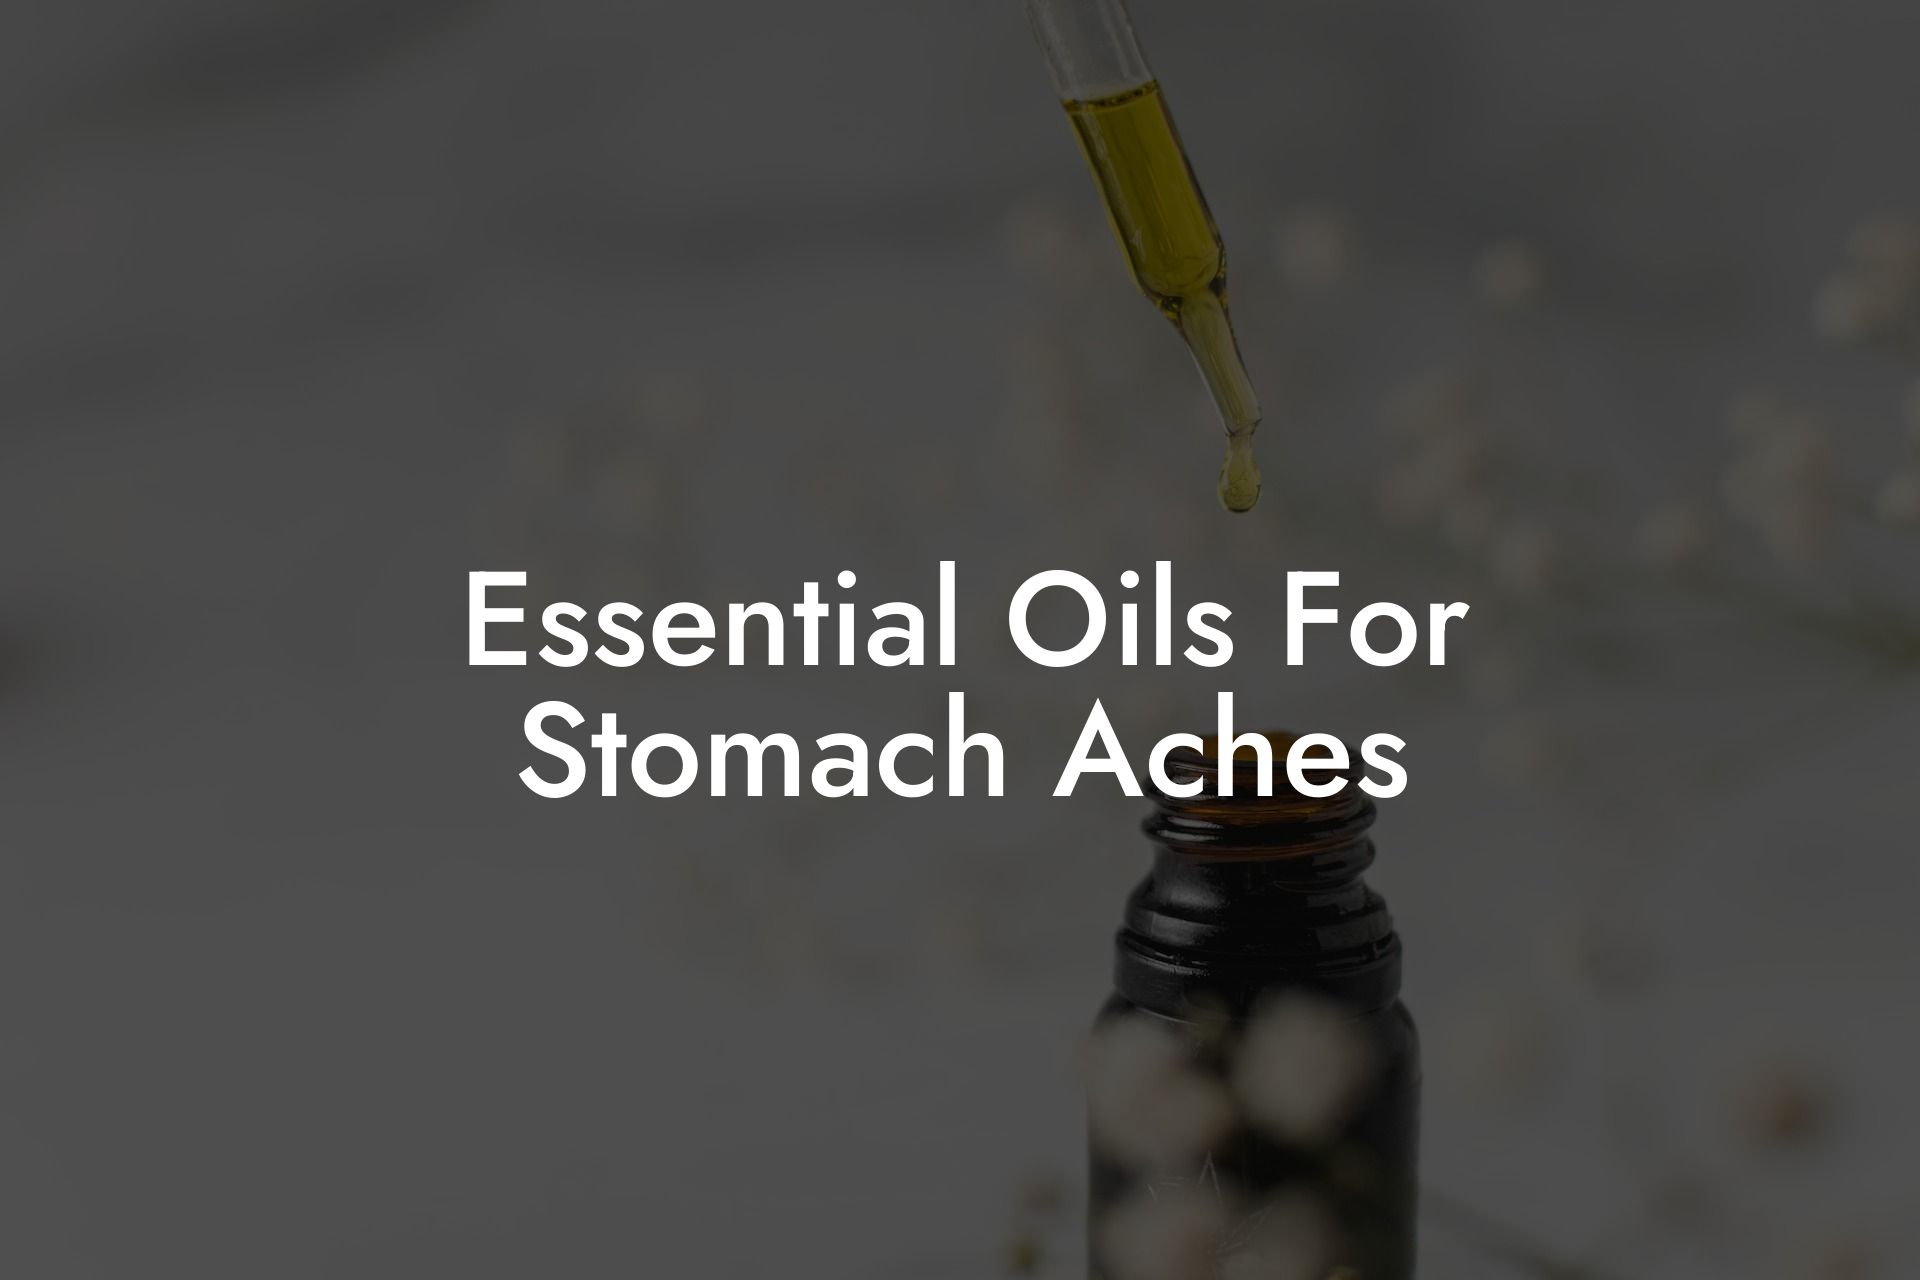 Essential Oils For Stomach Aches